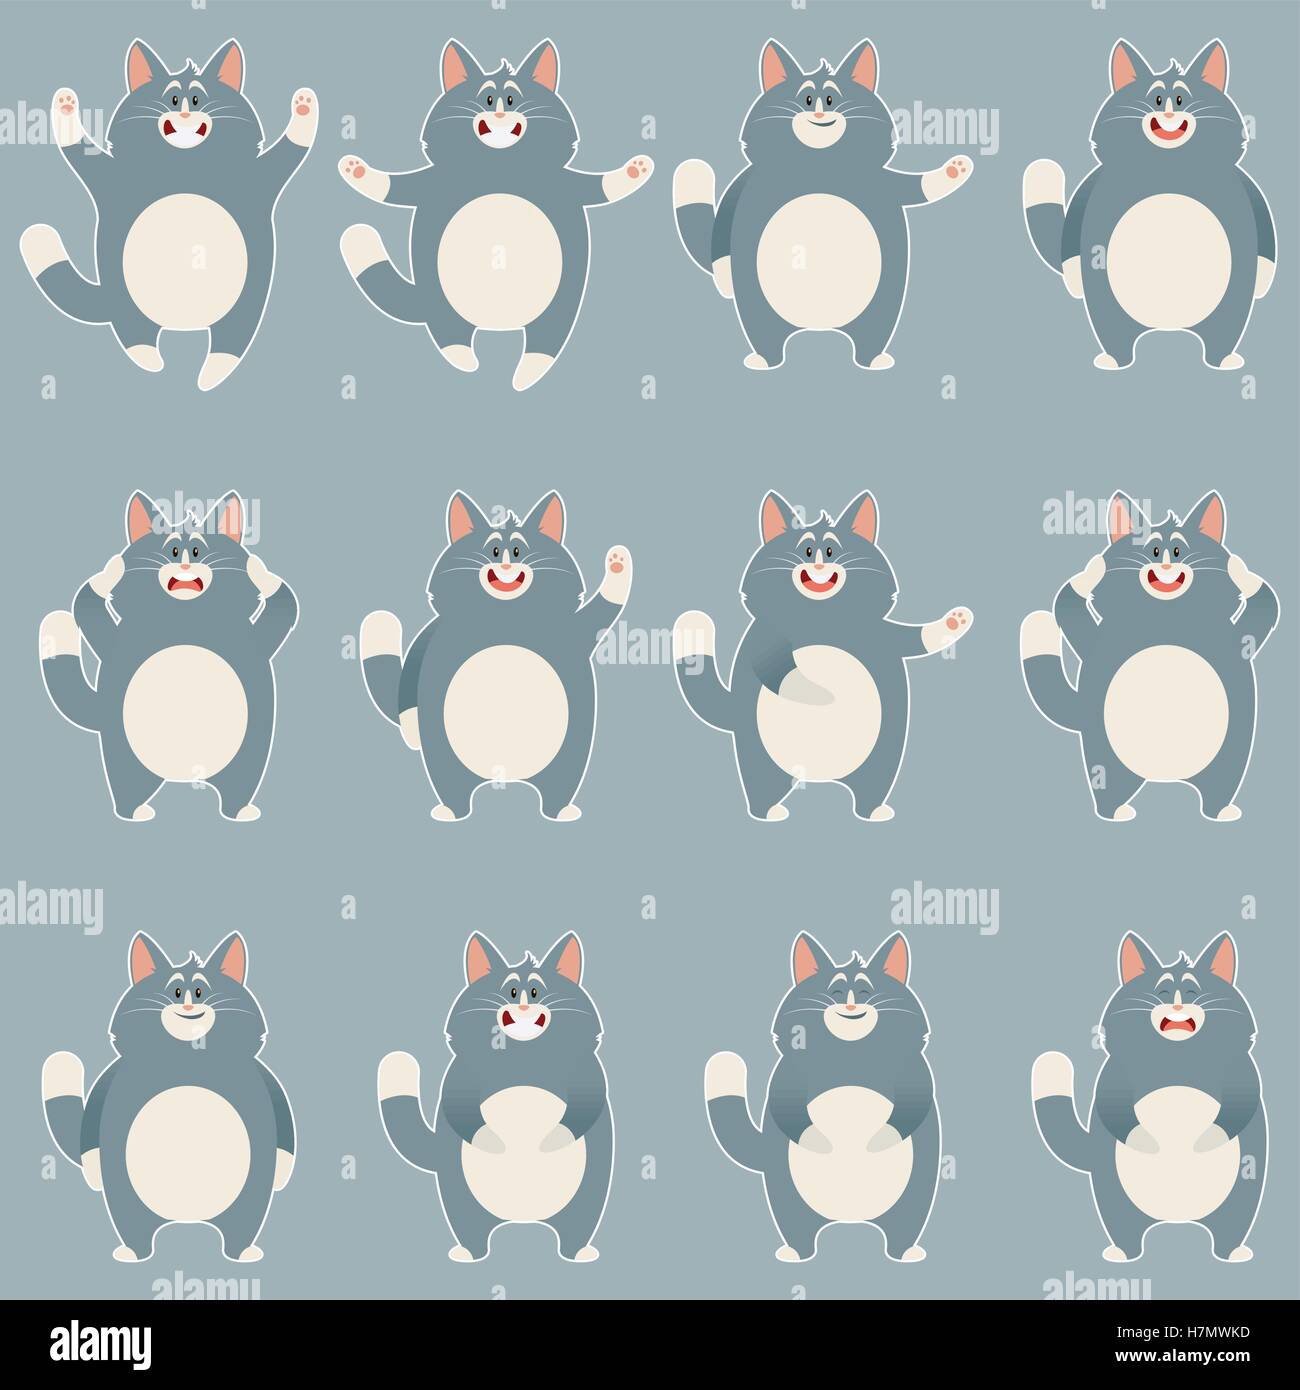 Vector image of the Set of flat grey cat icons Stock Vector